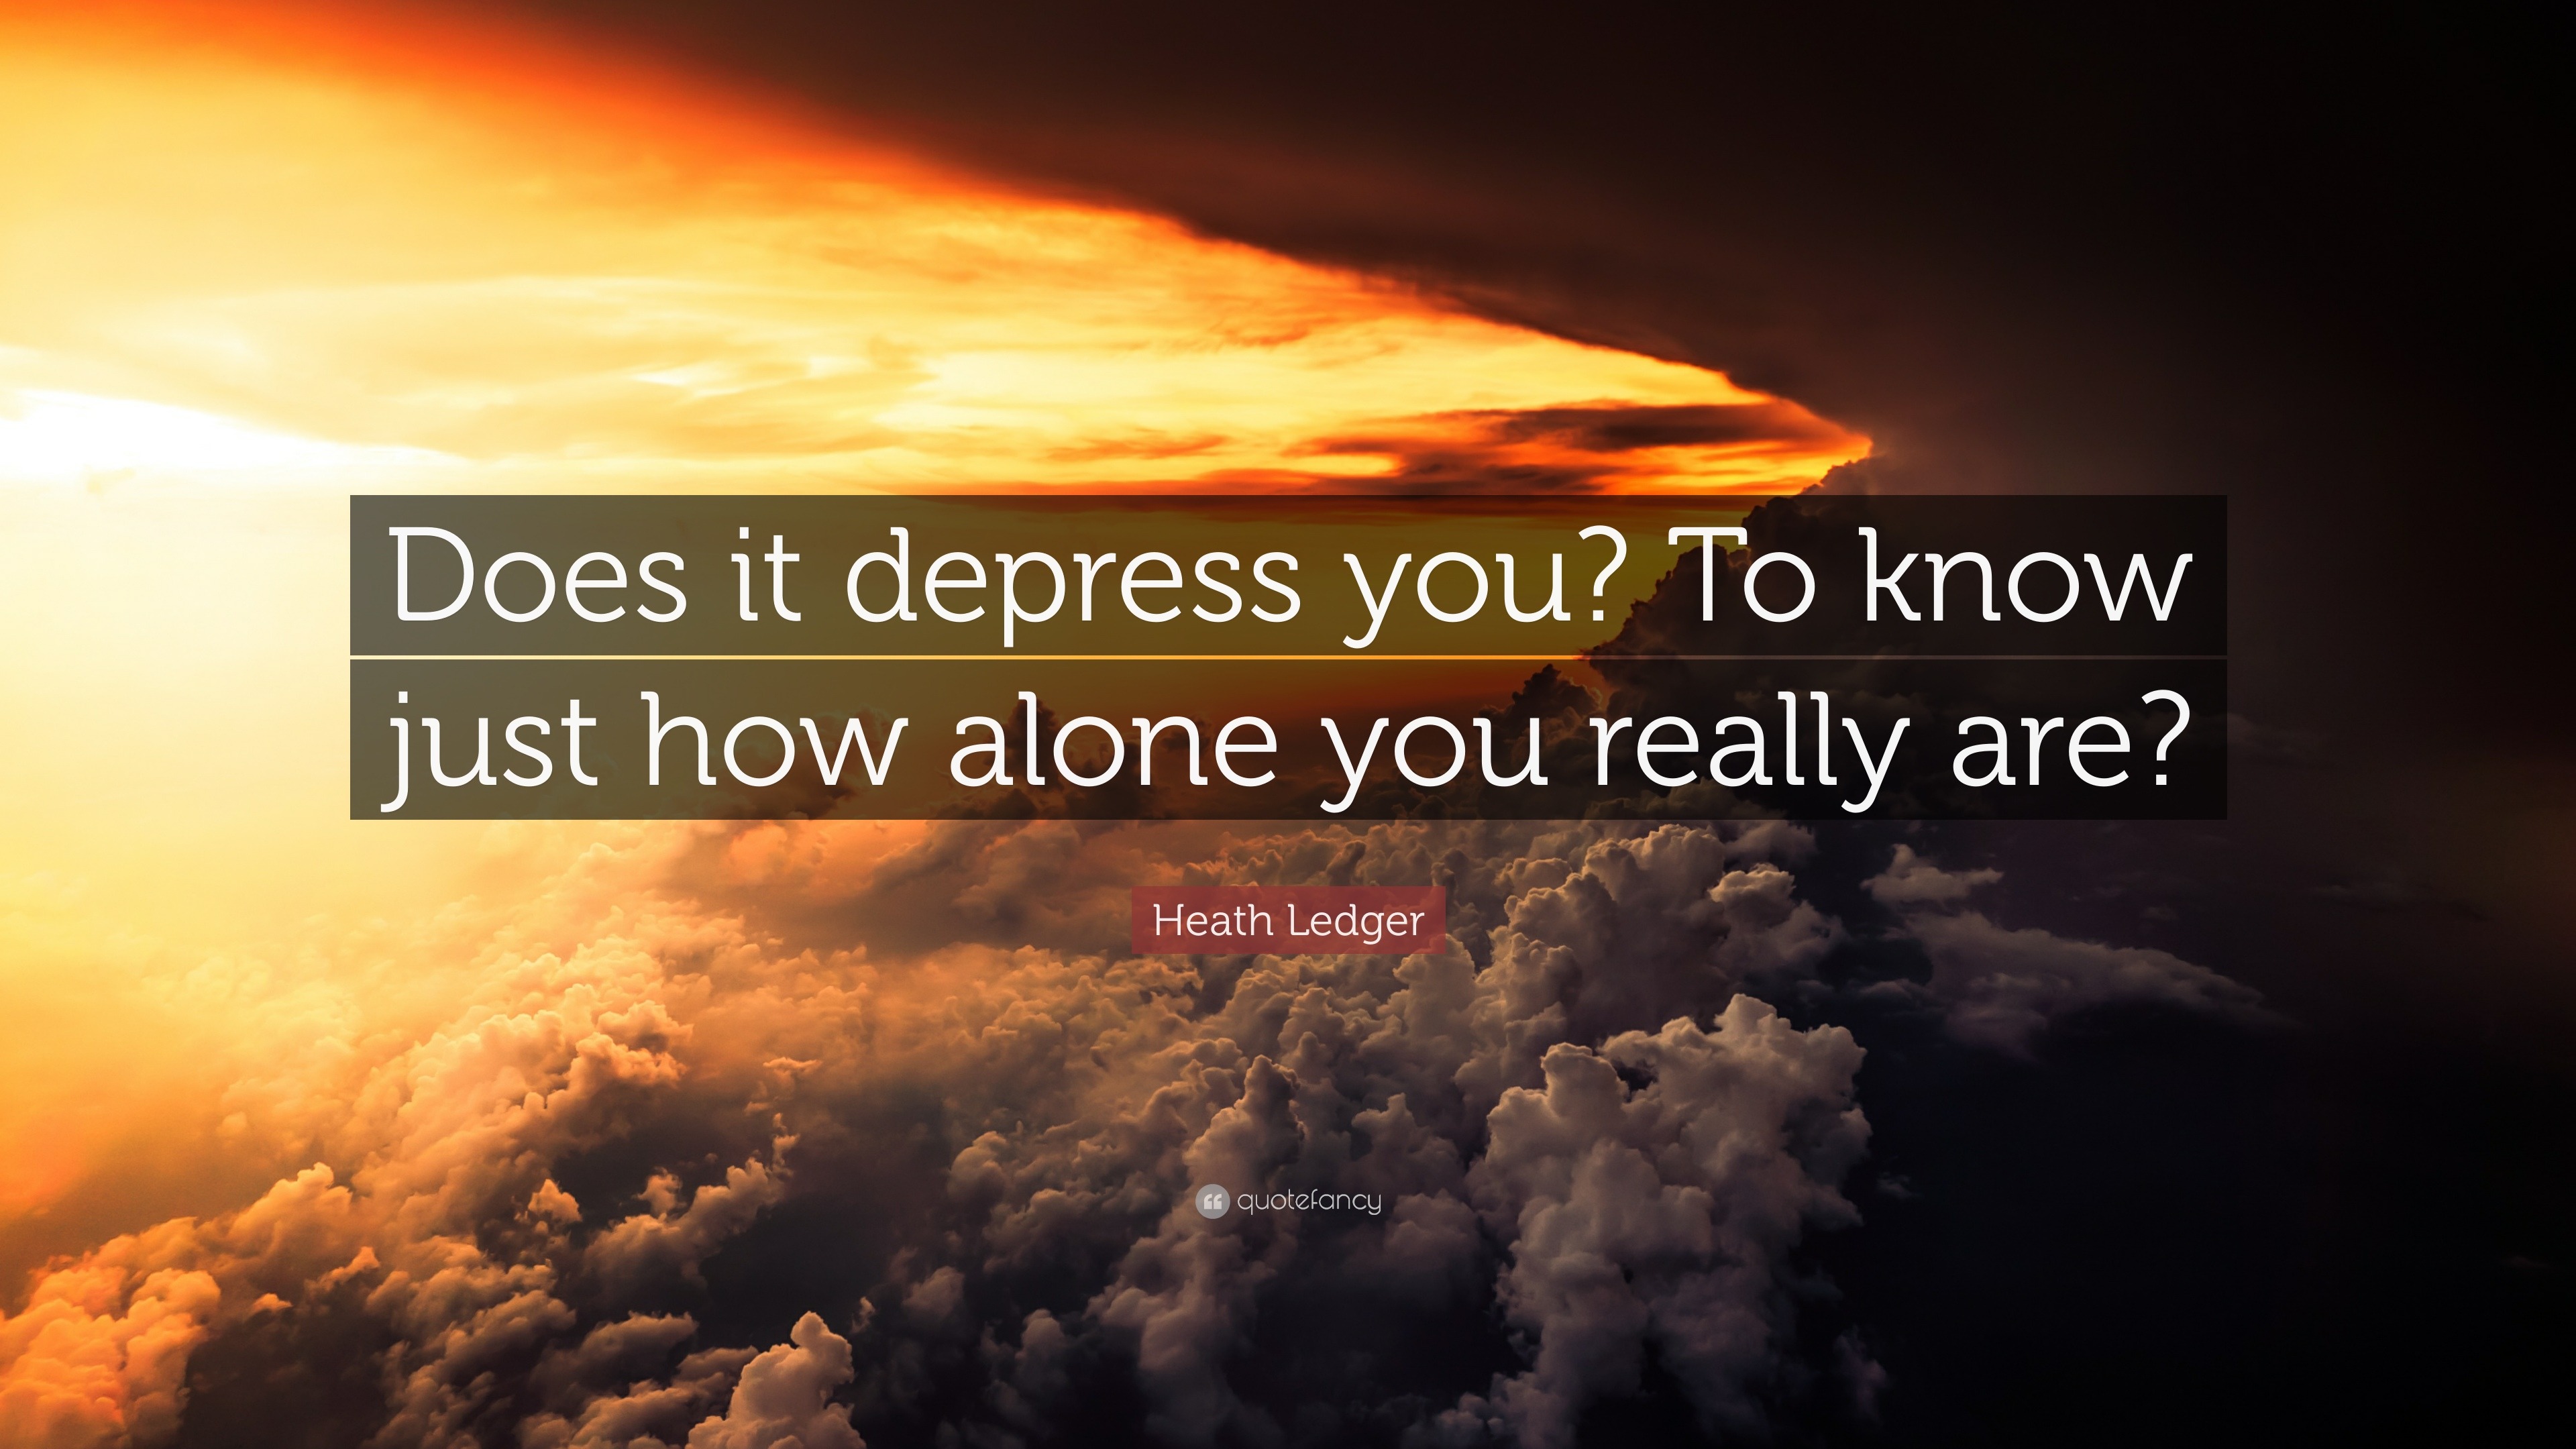 Heath Ledger Quote: “Does it depress you? To know just how alone you ...